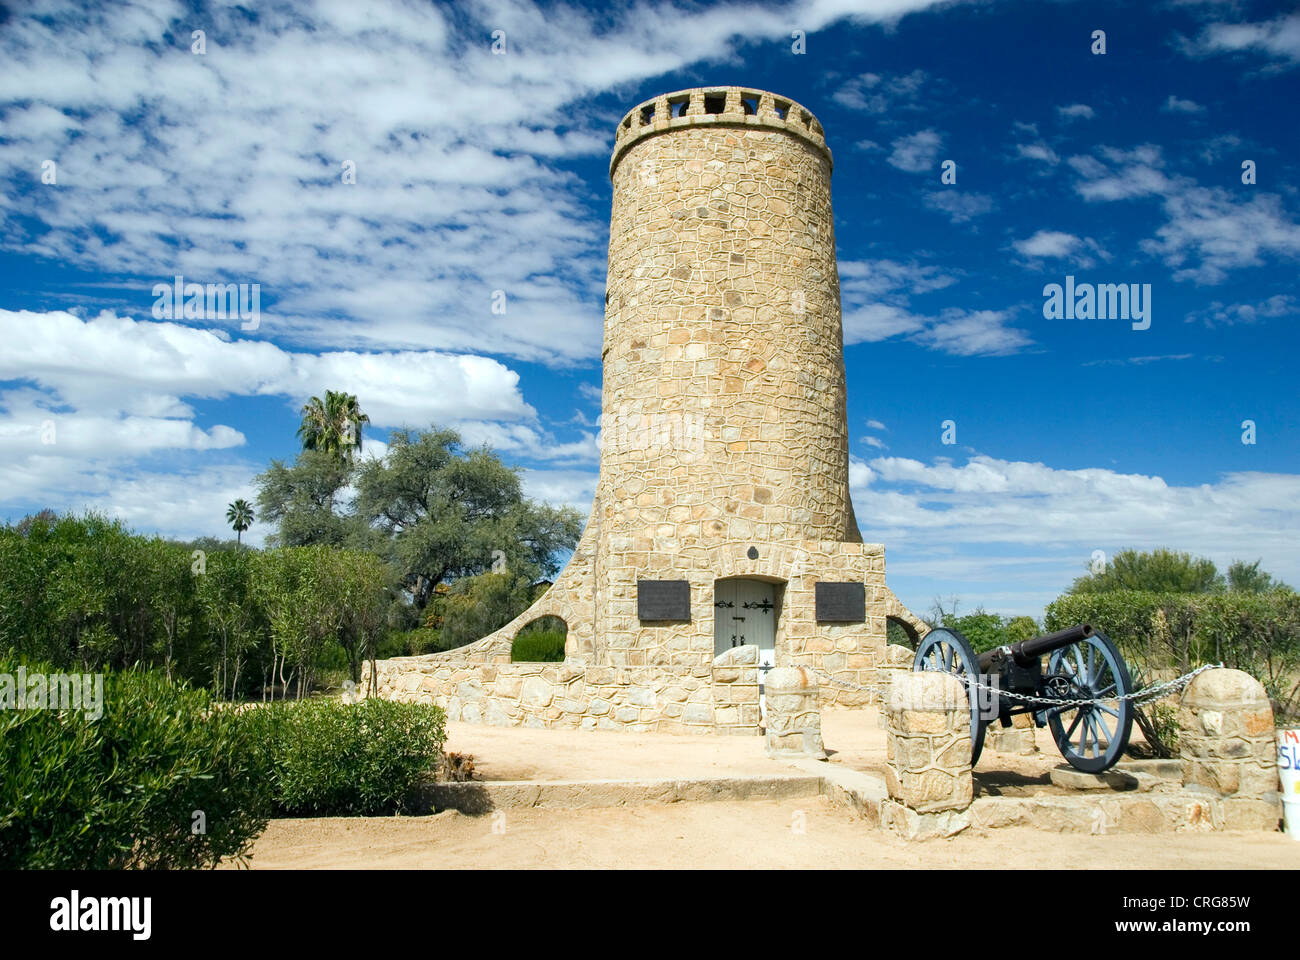 Franke tower build in 1908 with historical connon, Namibia, Omaruru Stock Photo